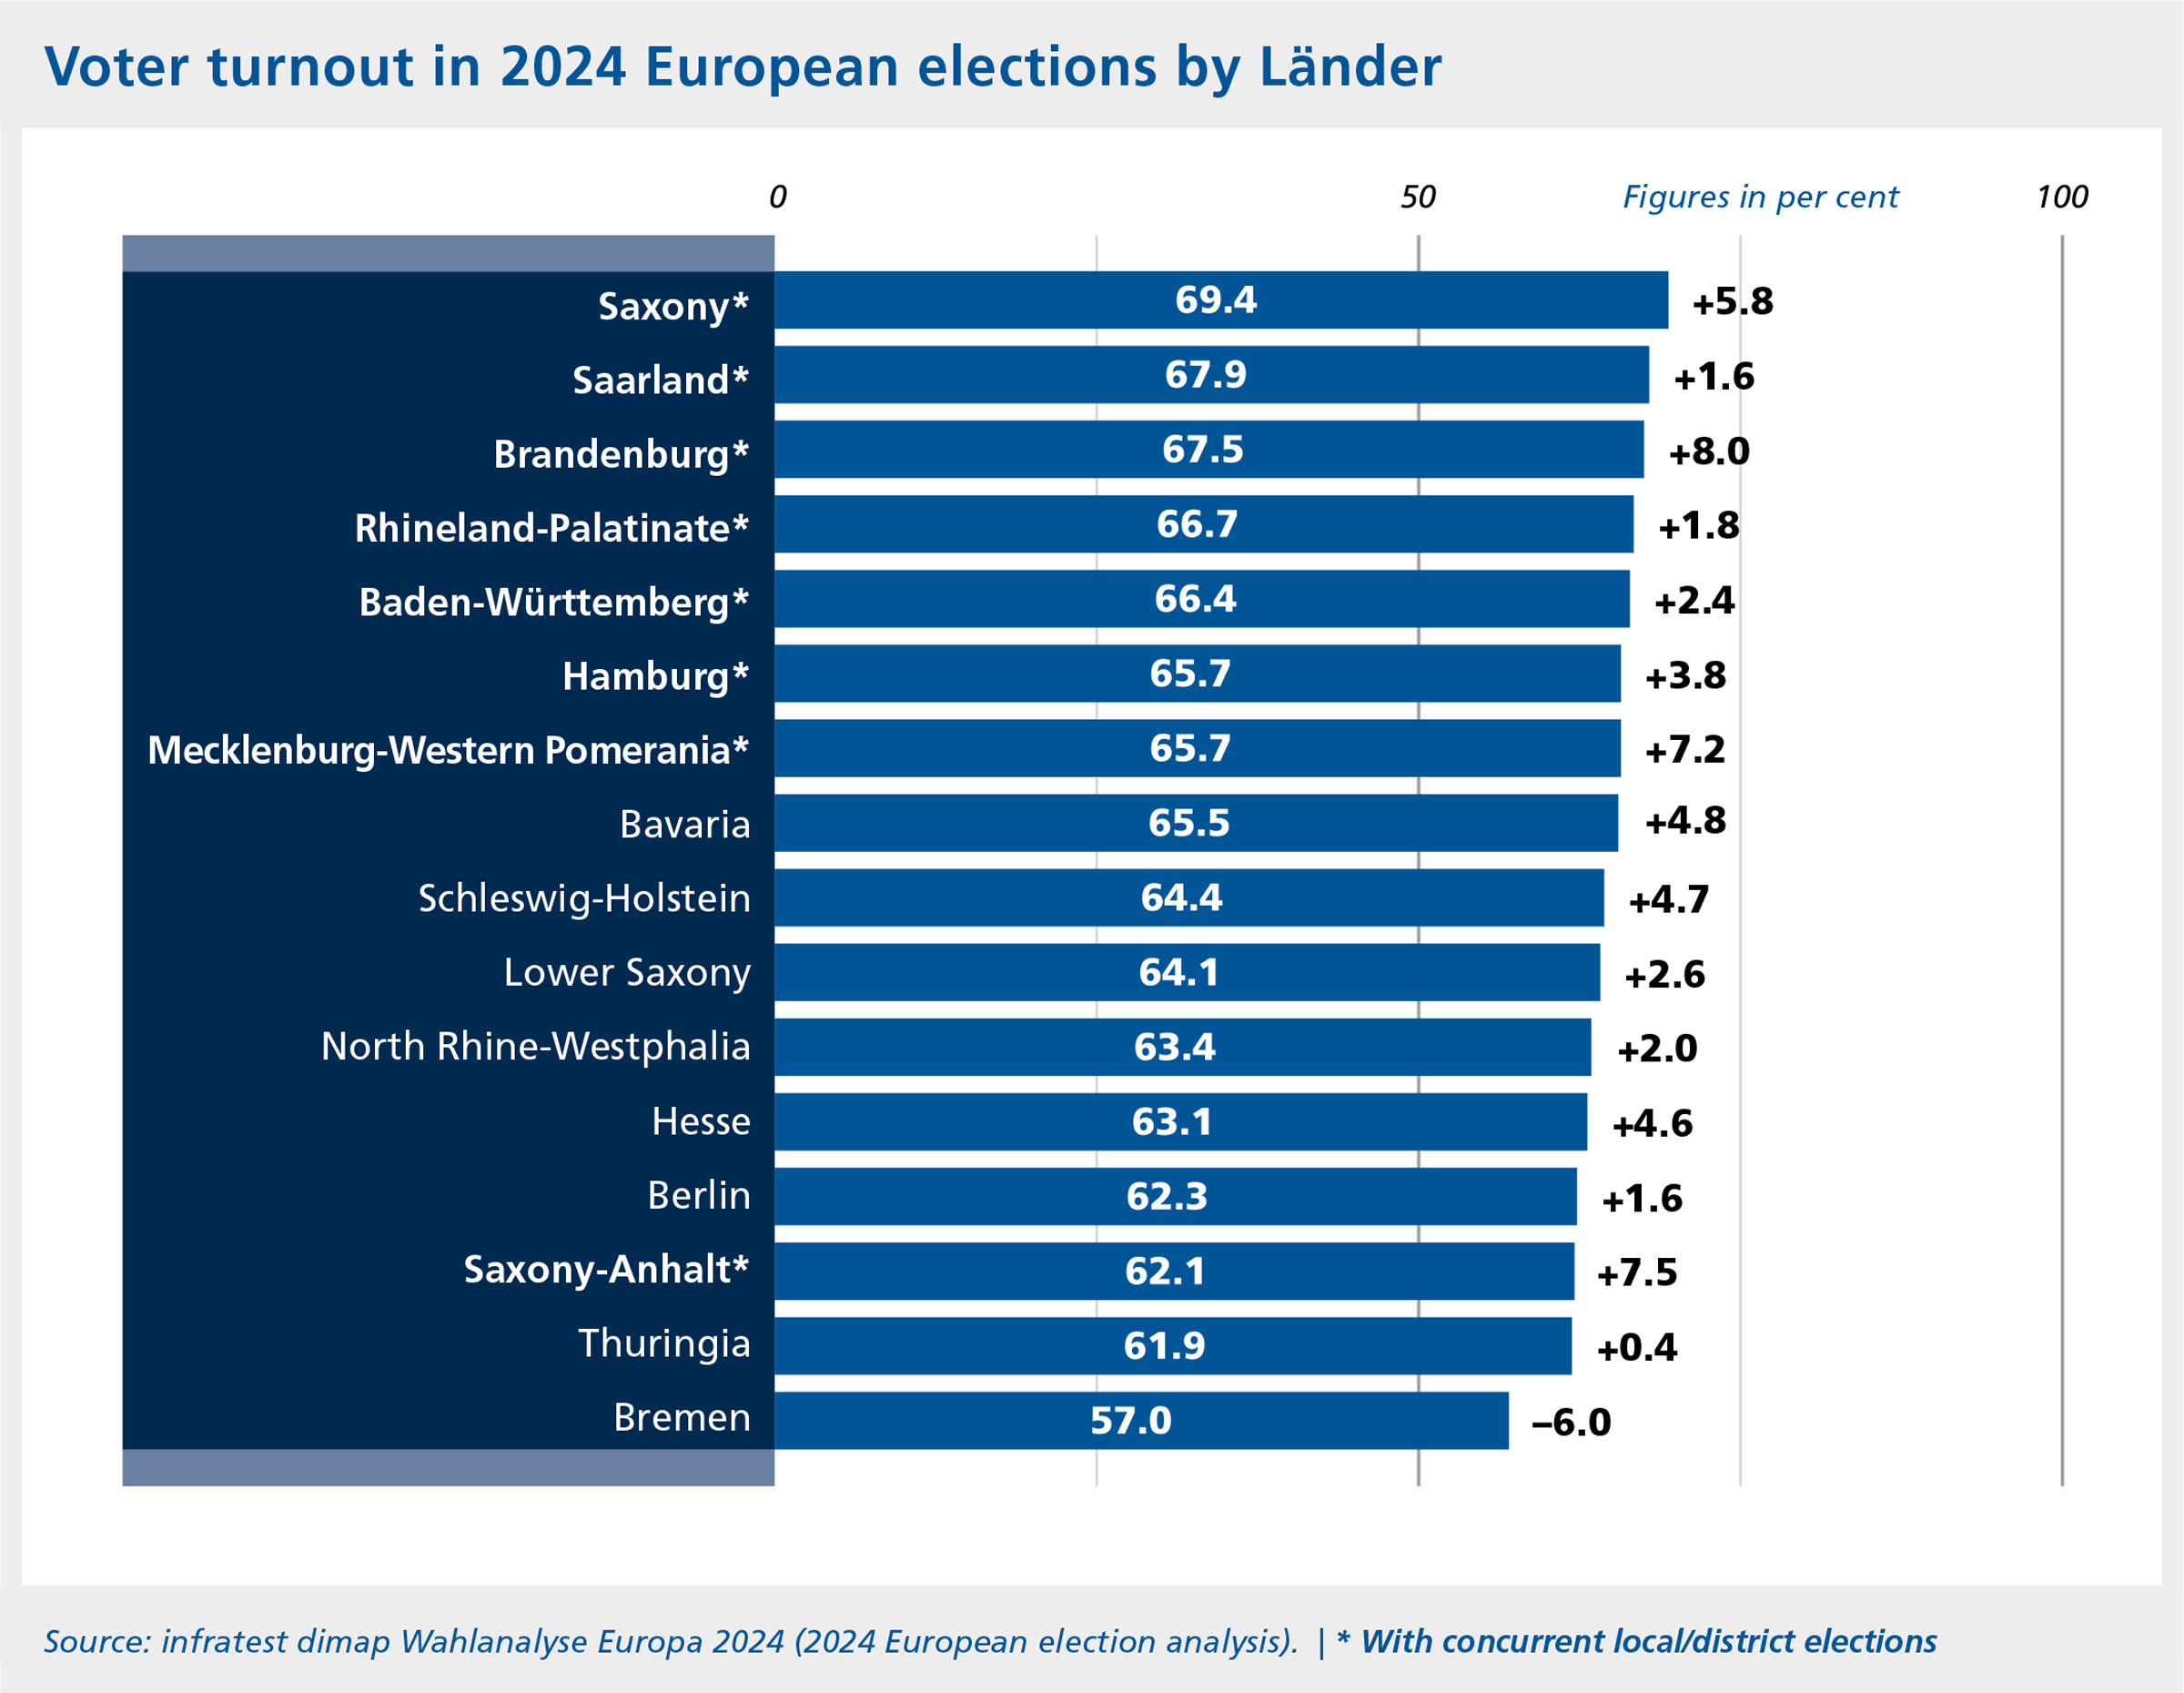 Bar chart showing voter turnout in the 16 German Länder in the 2024 European elections, additionally showing increases and decreases compared to the previous election